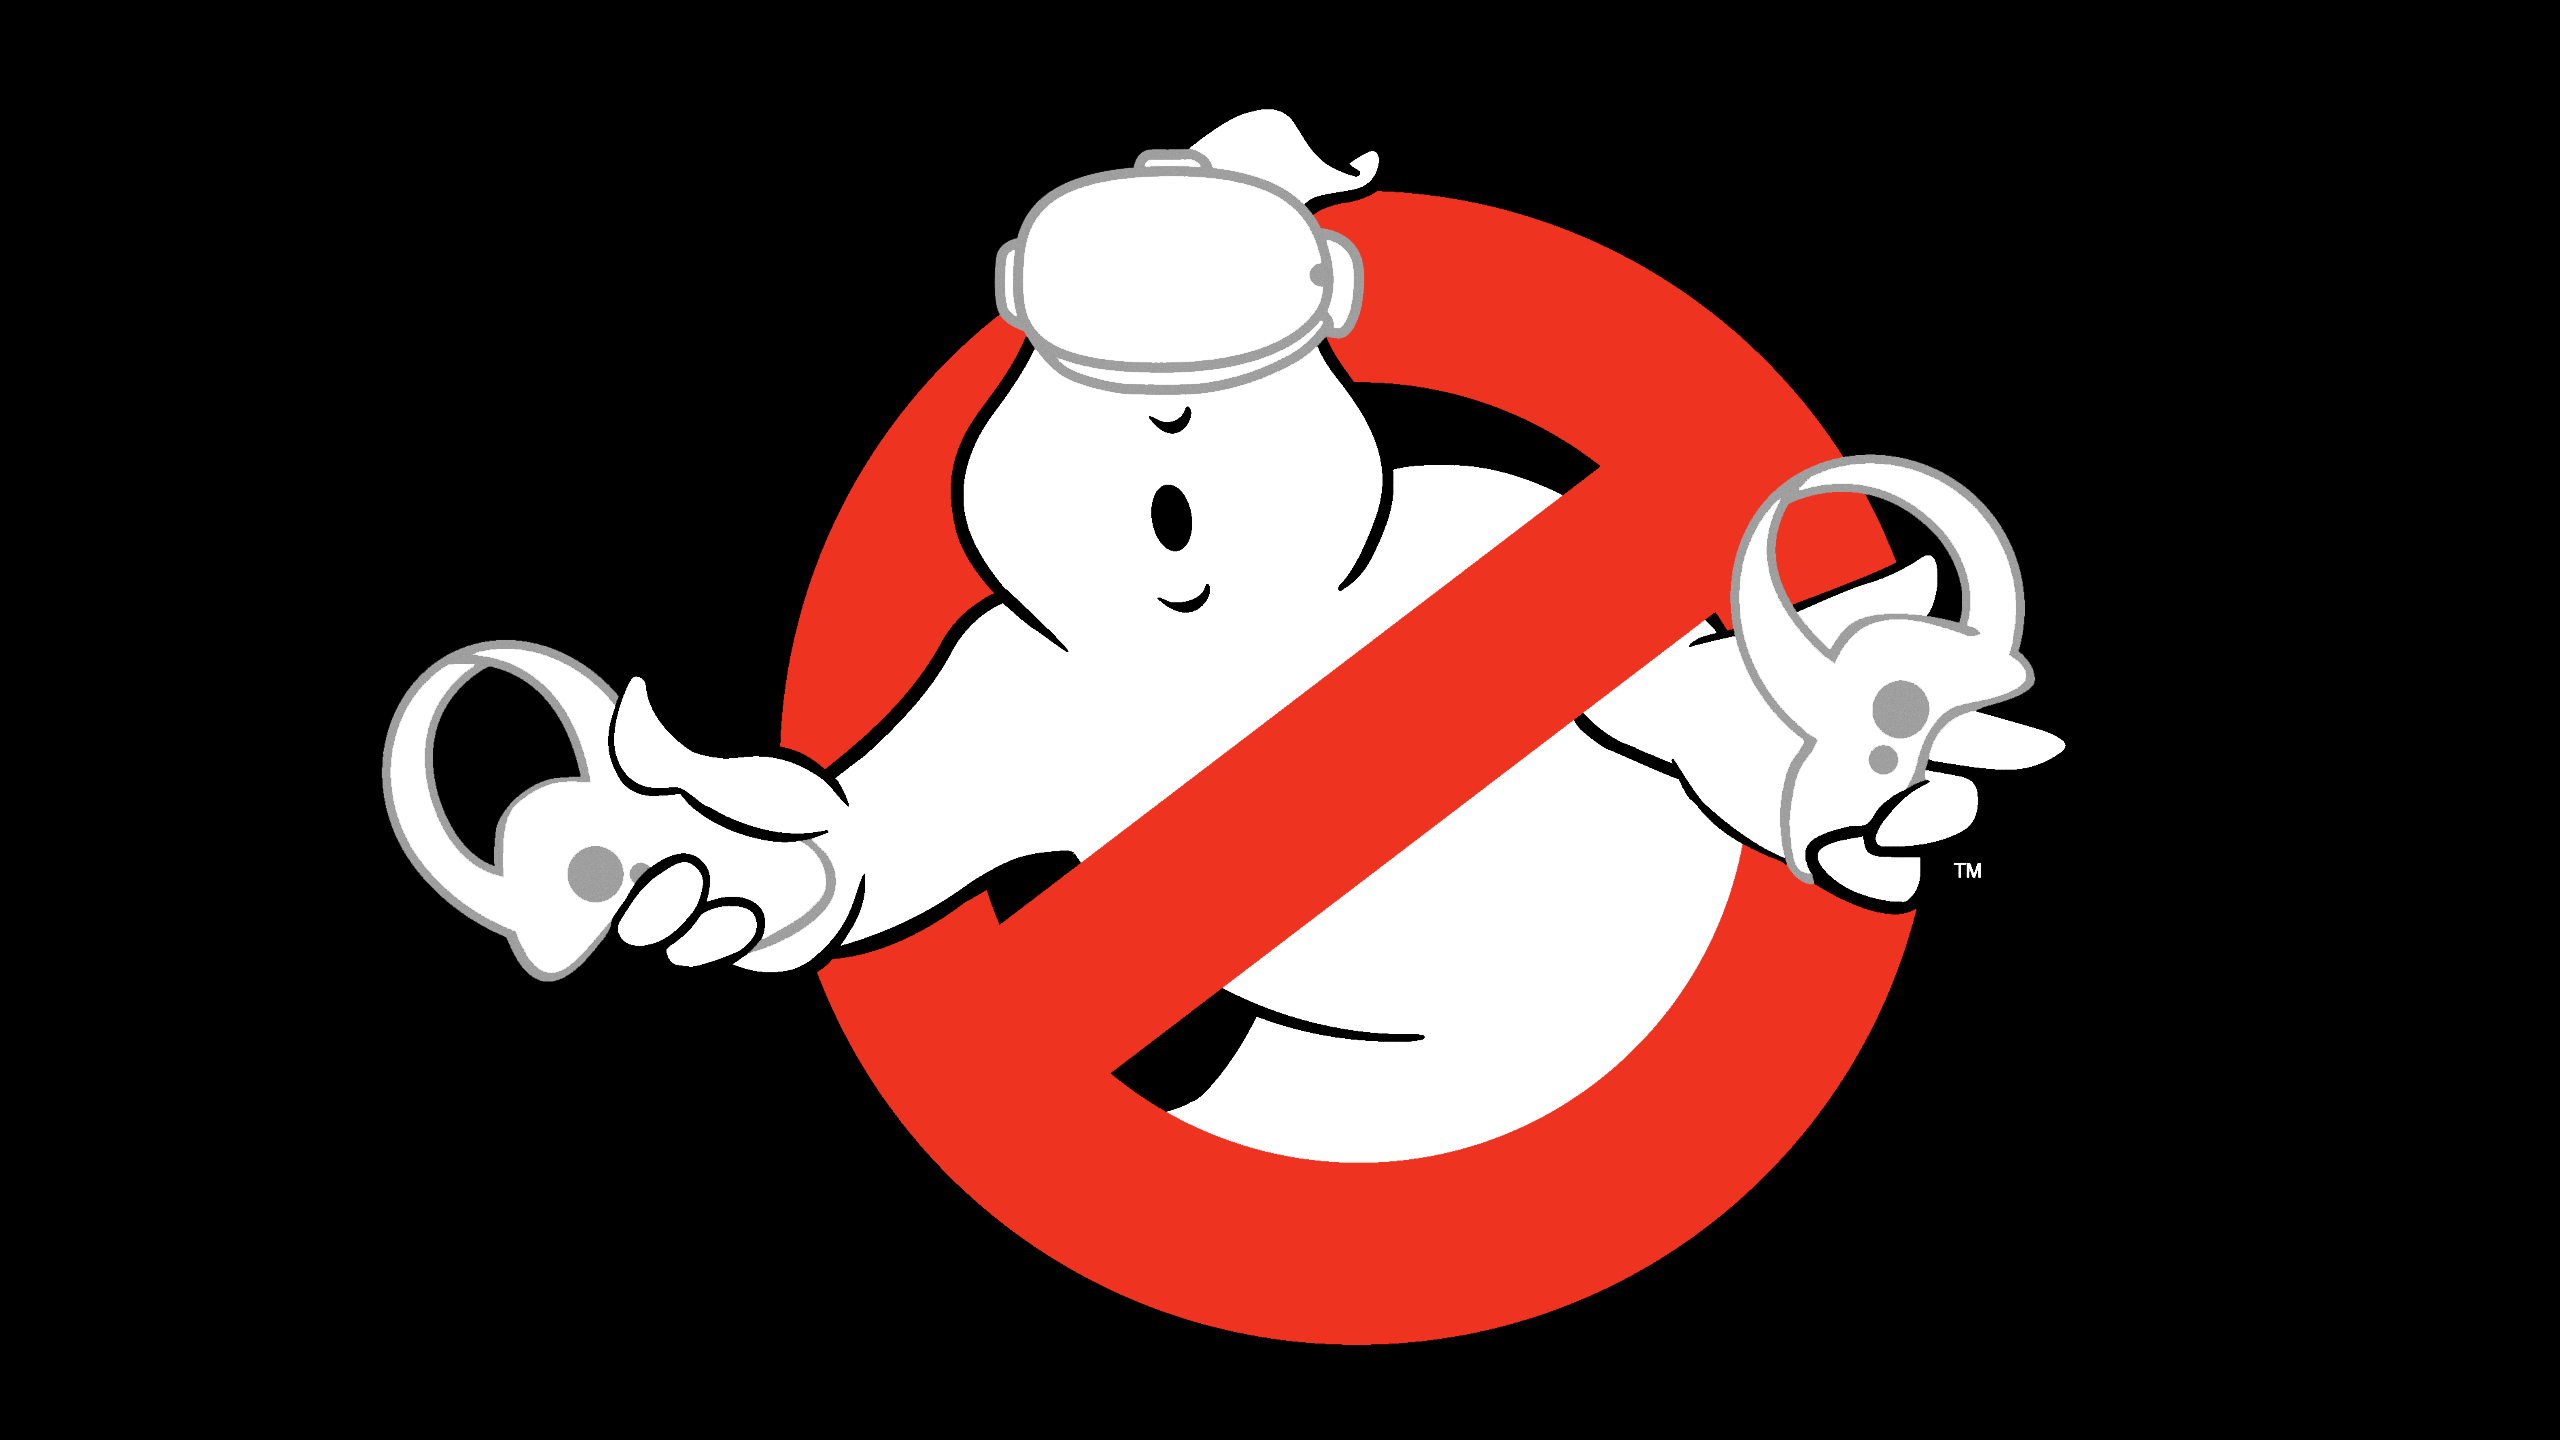 Co-op ‘Ghostbusters VR’ Game Revealed from Sony Pictures Virtual Reality and Developer nDreams